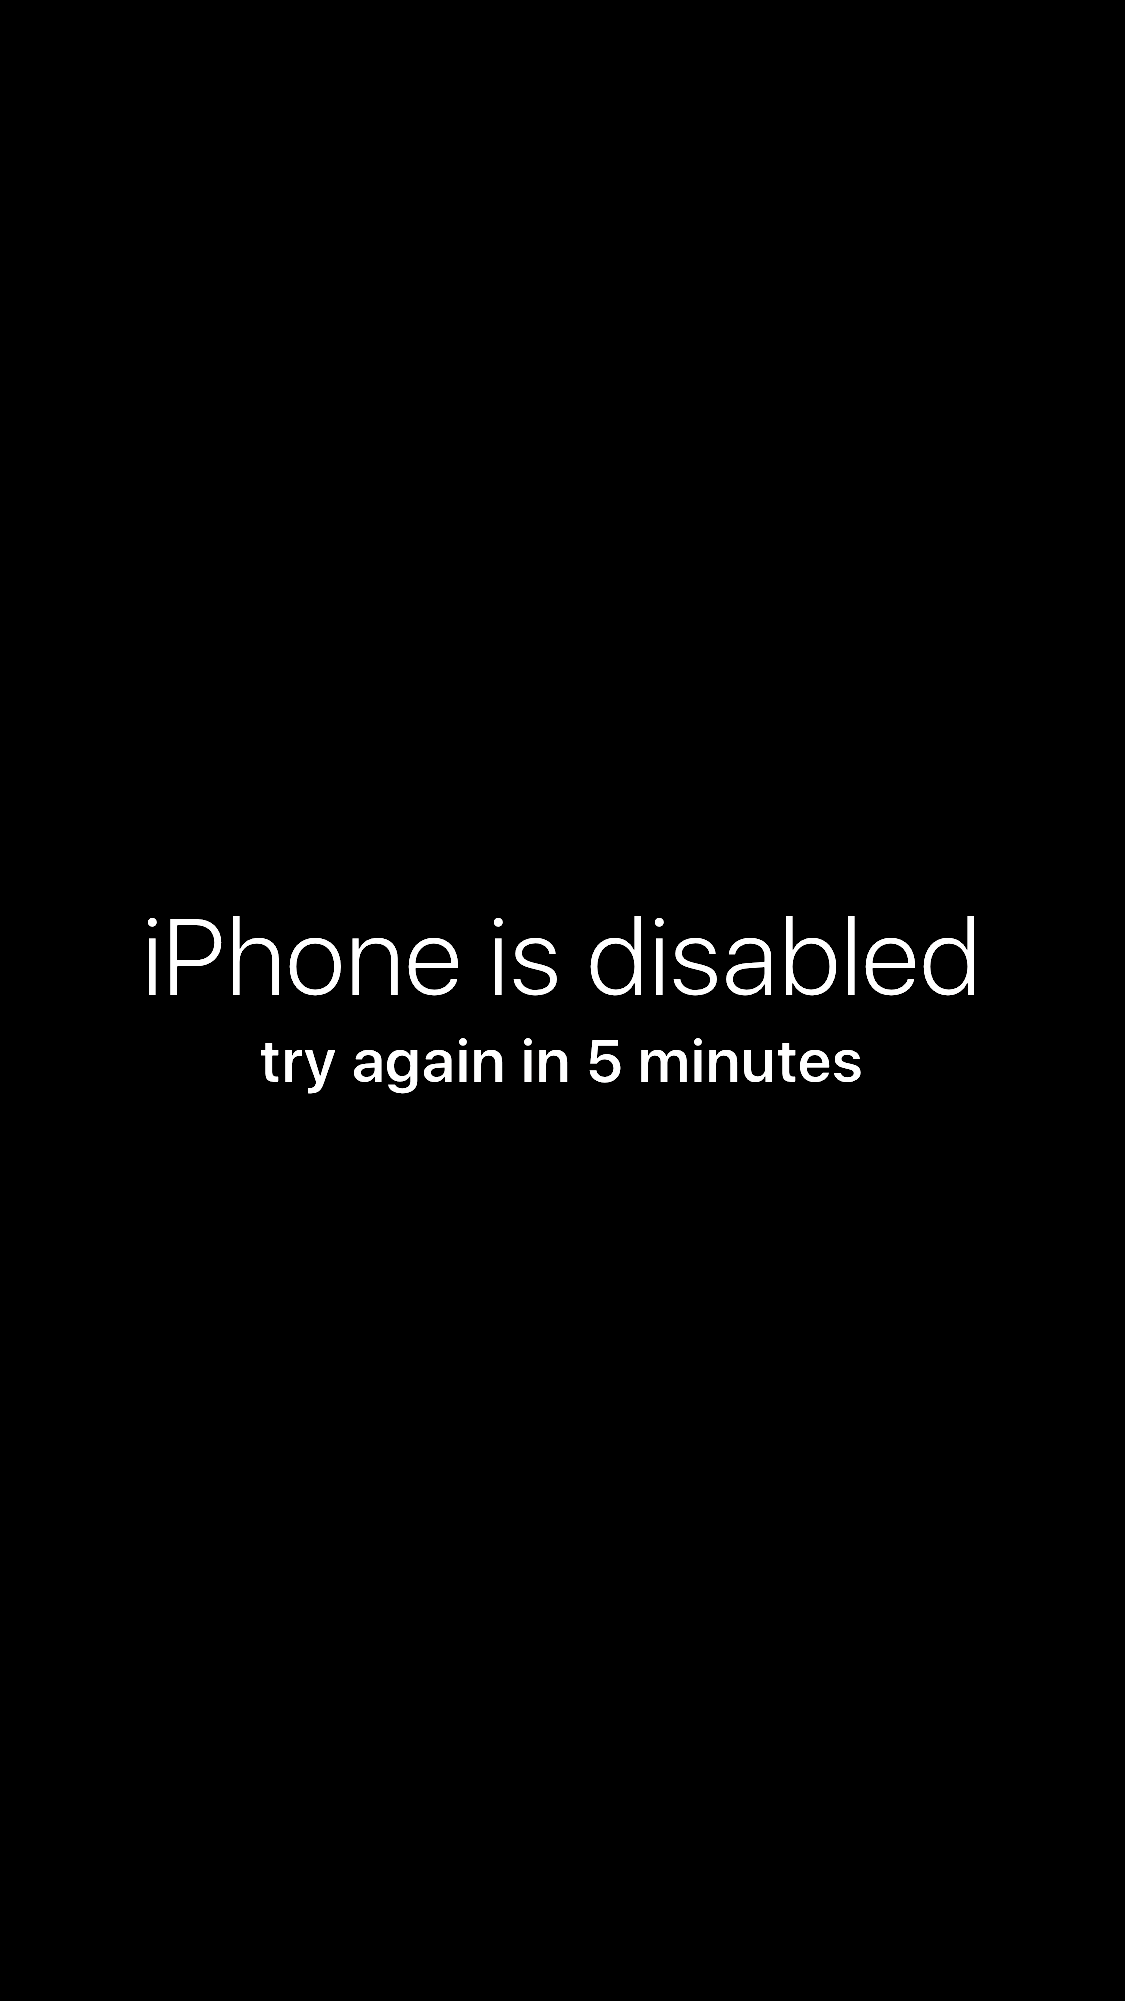 April Fools The iPhone Is Disabled Wallpaper Prank